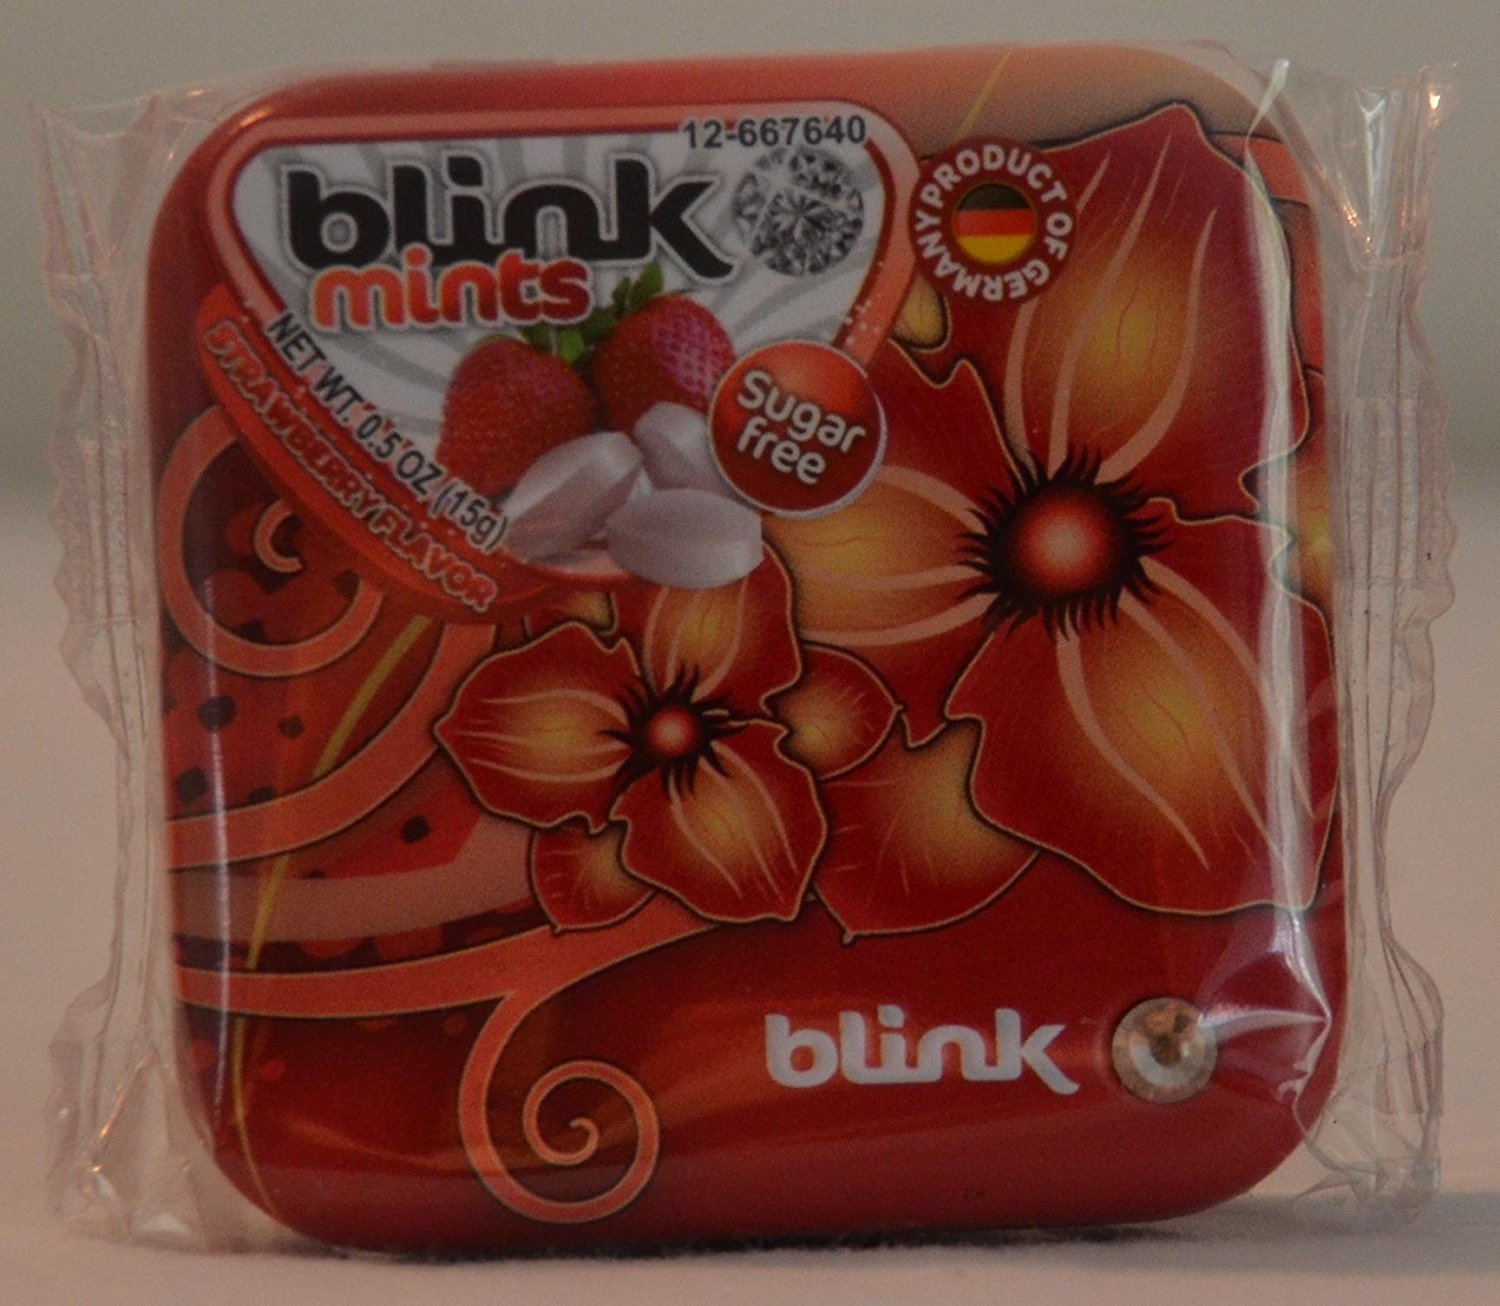 BLINK STRAWBERRY SUGAR FREE MINTS 15g (6 Boxes)